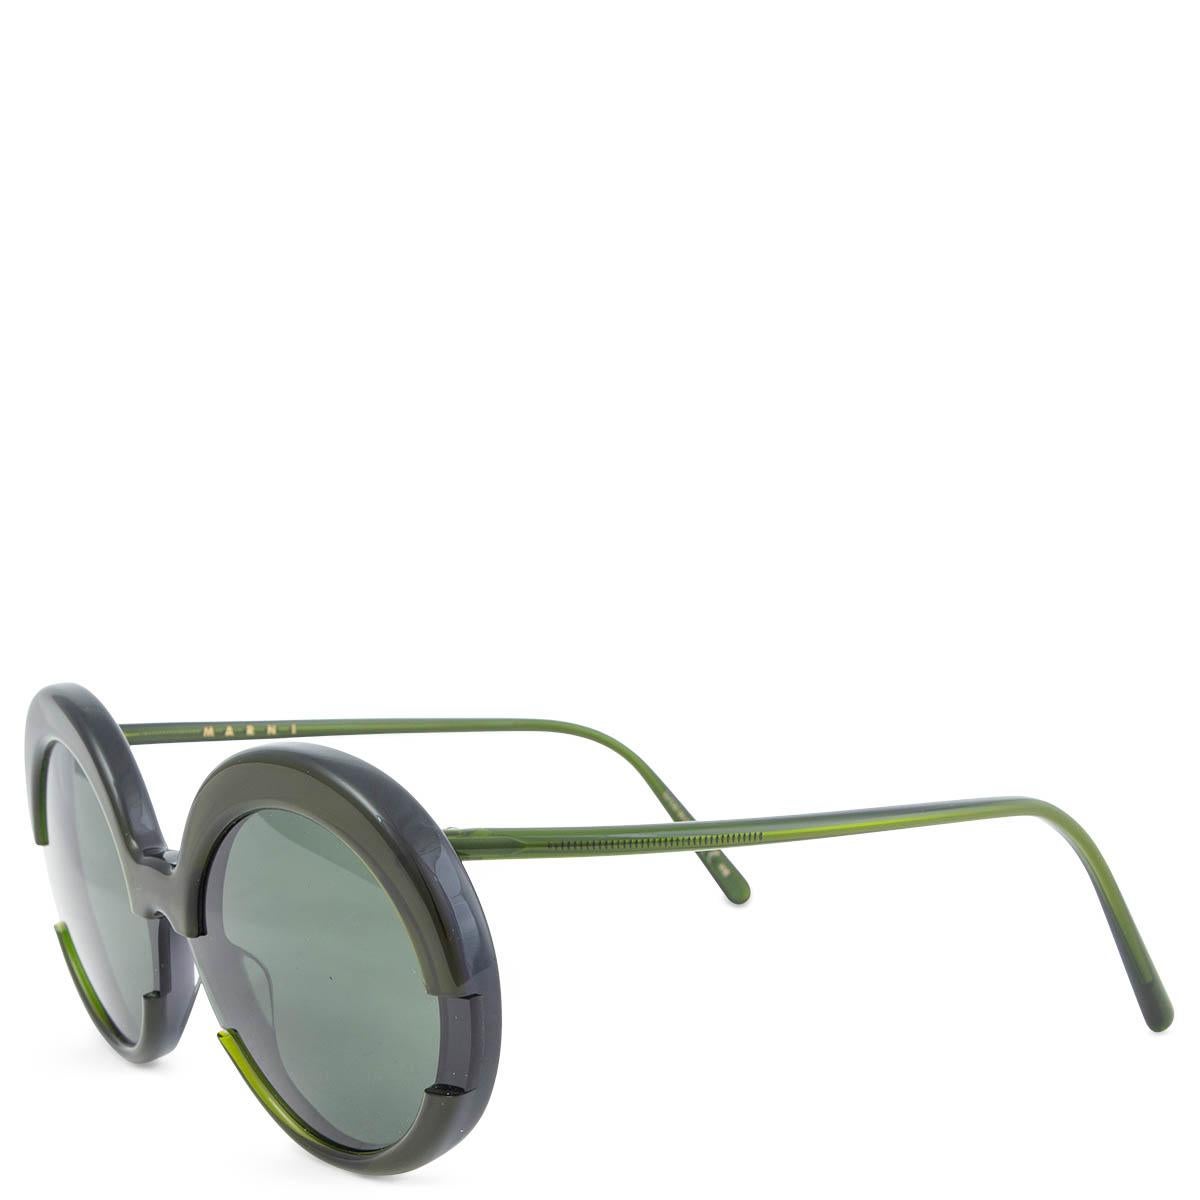 100% authentic Marni ME609S Horizon round sunglasses in deep forest green acetate with green lenses. Have been worn and are in excellent condition. 

Measurements
Model	ME609S Horizon
Width	13.8cm (5.4in)
Height	5.8cm (2.3in)

All our listings